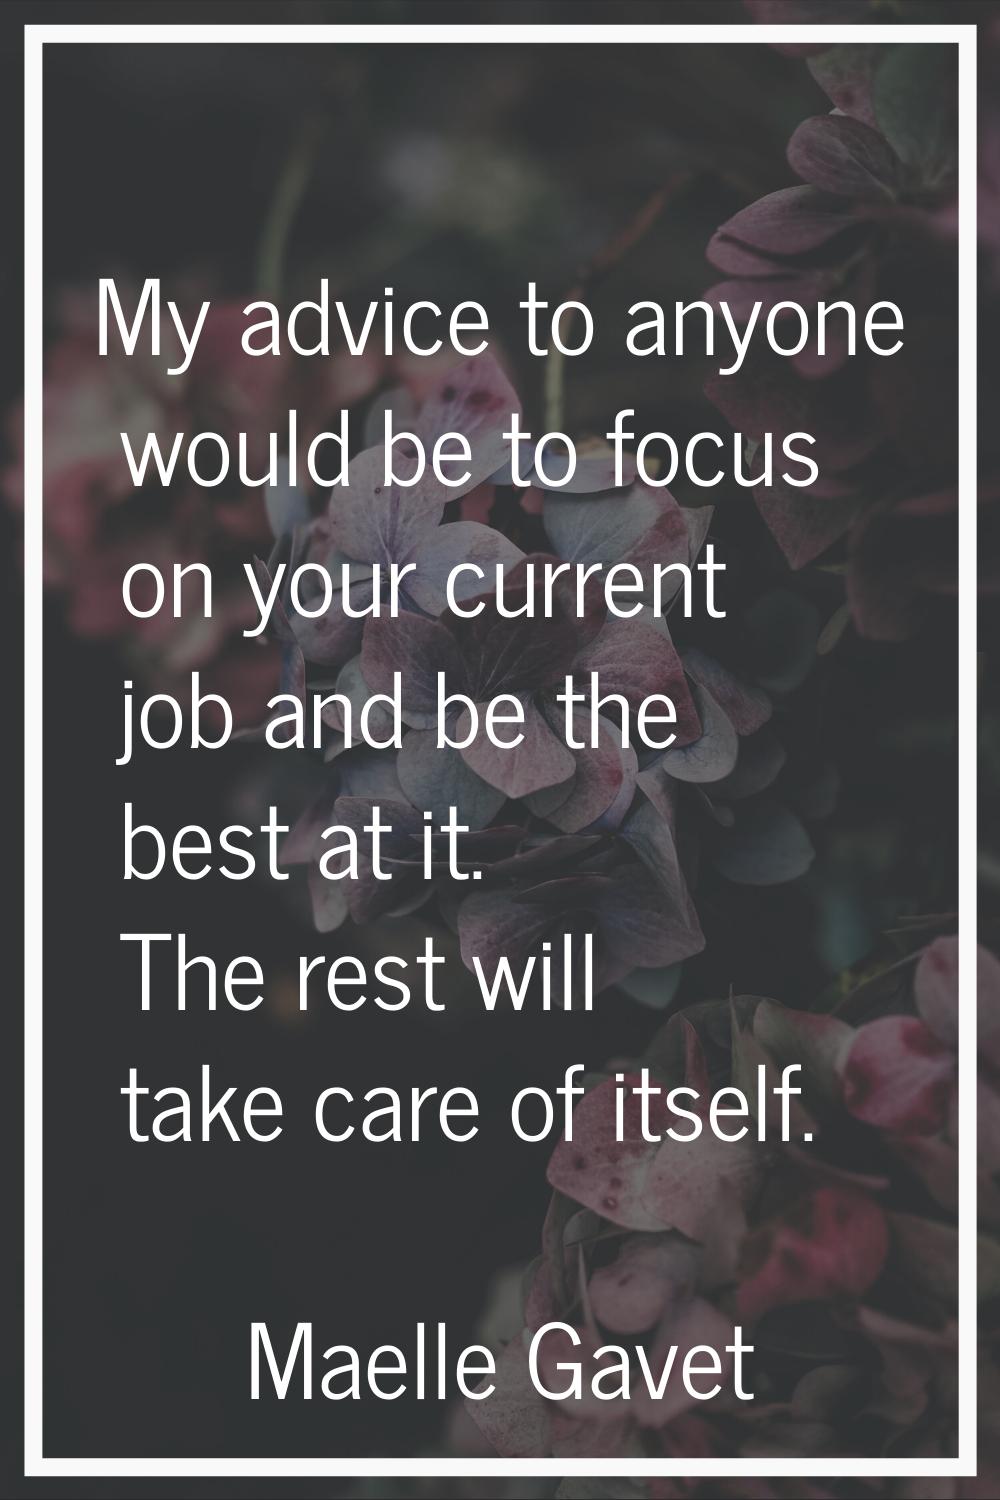 My advice to anyone would be to focus on your current job and be the best at it. The rest will take